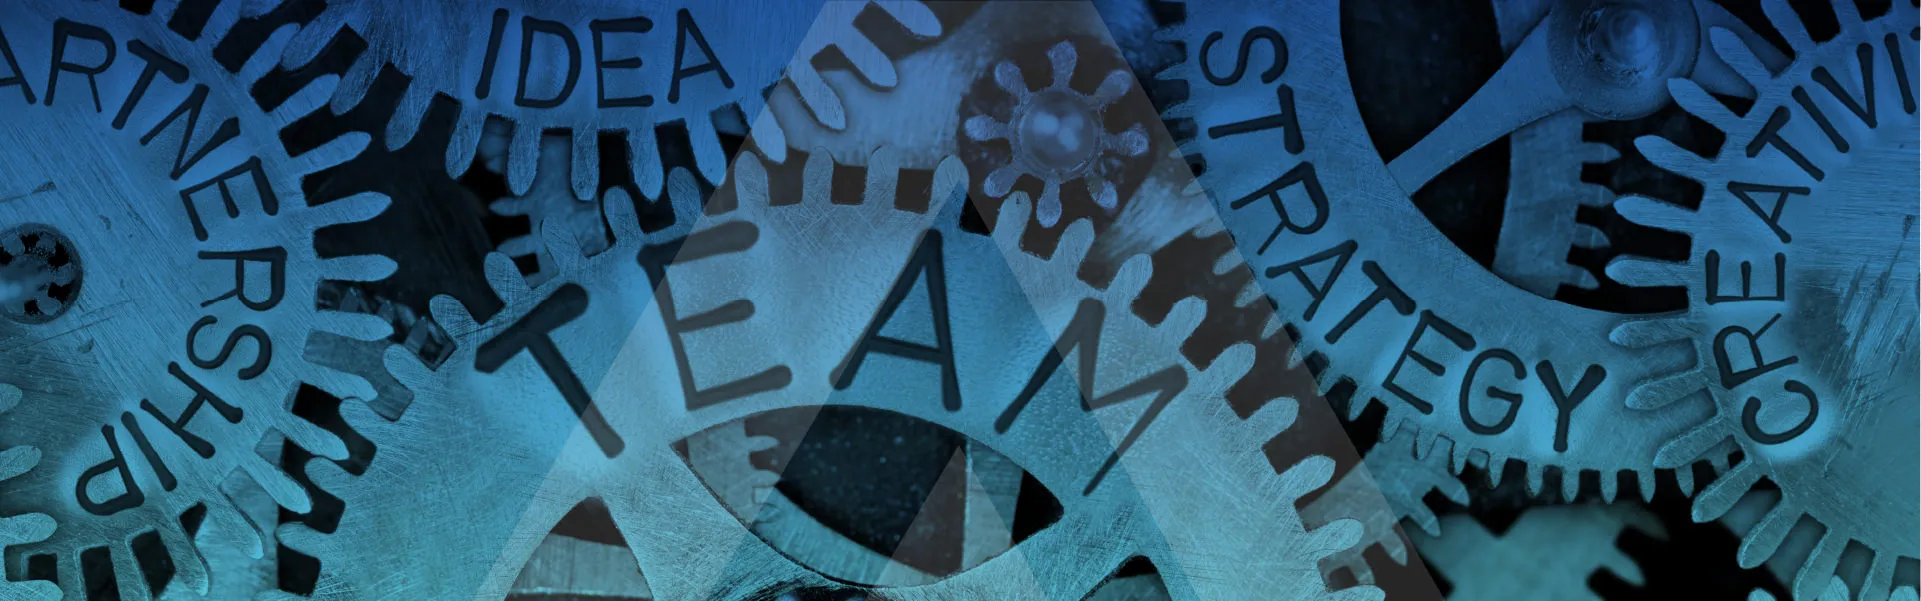 Image depicting cogs that make up a team